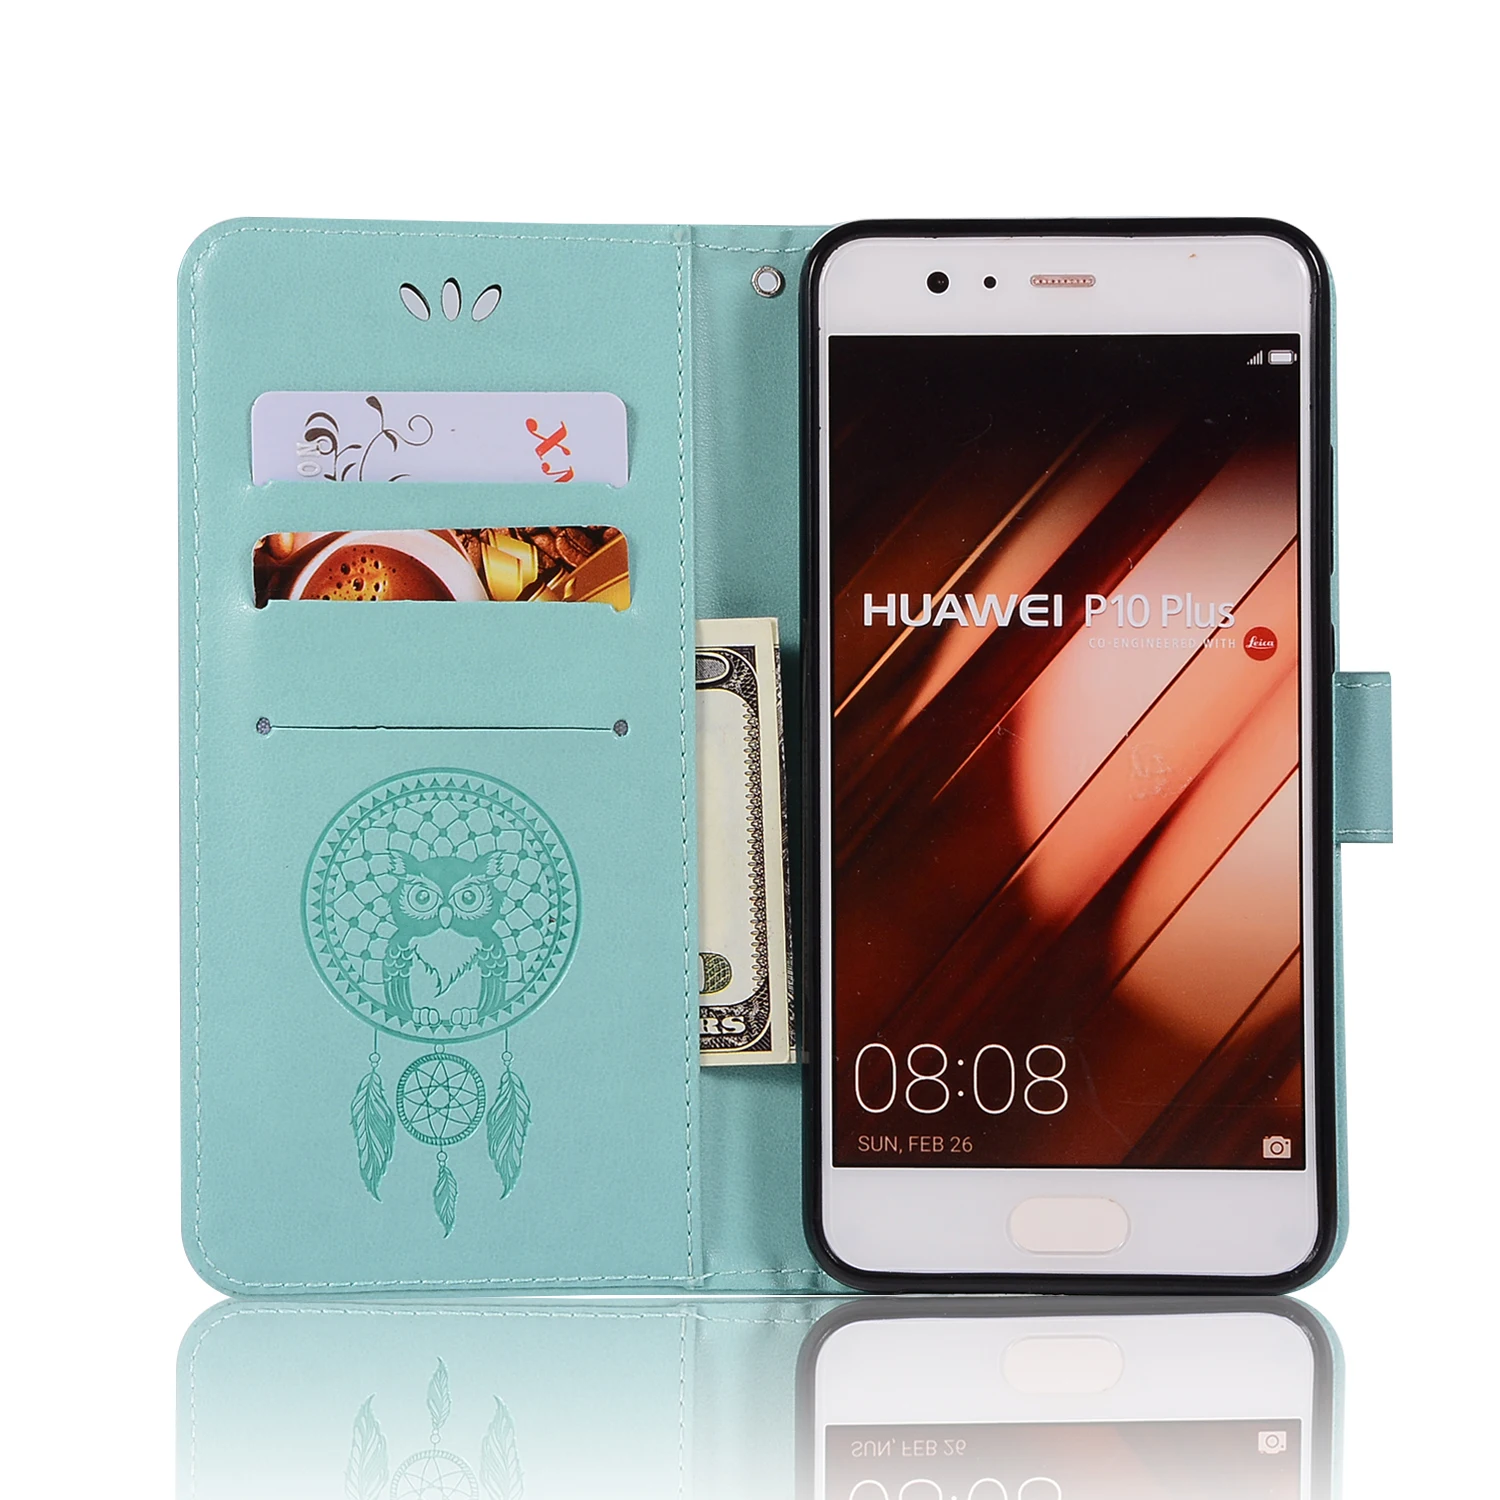 For Huawei P10 Plus Flip Wallet Case P 10 Plus Cases VKY-L09 VKY-L29 VKY-AL00 Leather Cover VKY L09 L29 AL00 Card Slot Phone Bag huawei phone cover